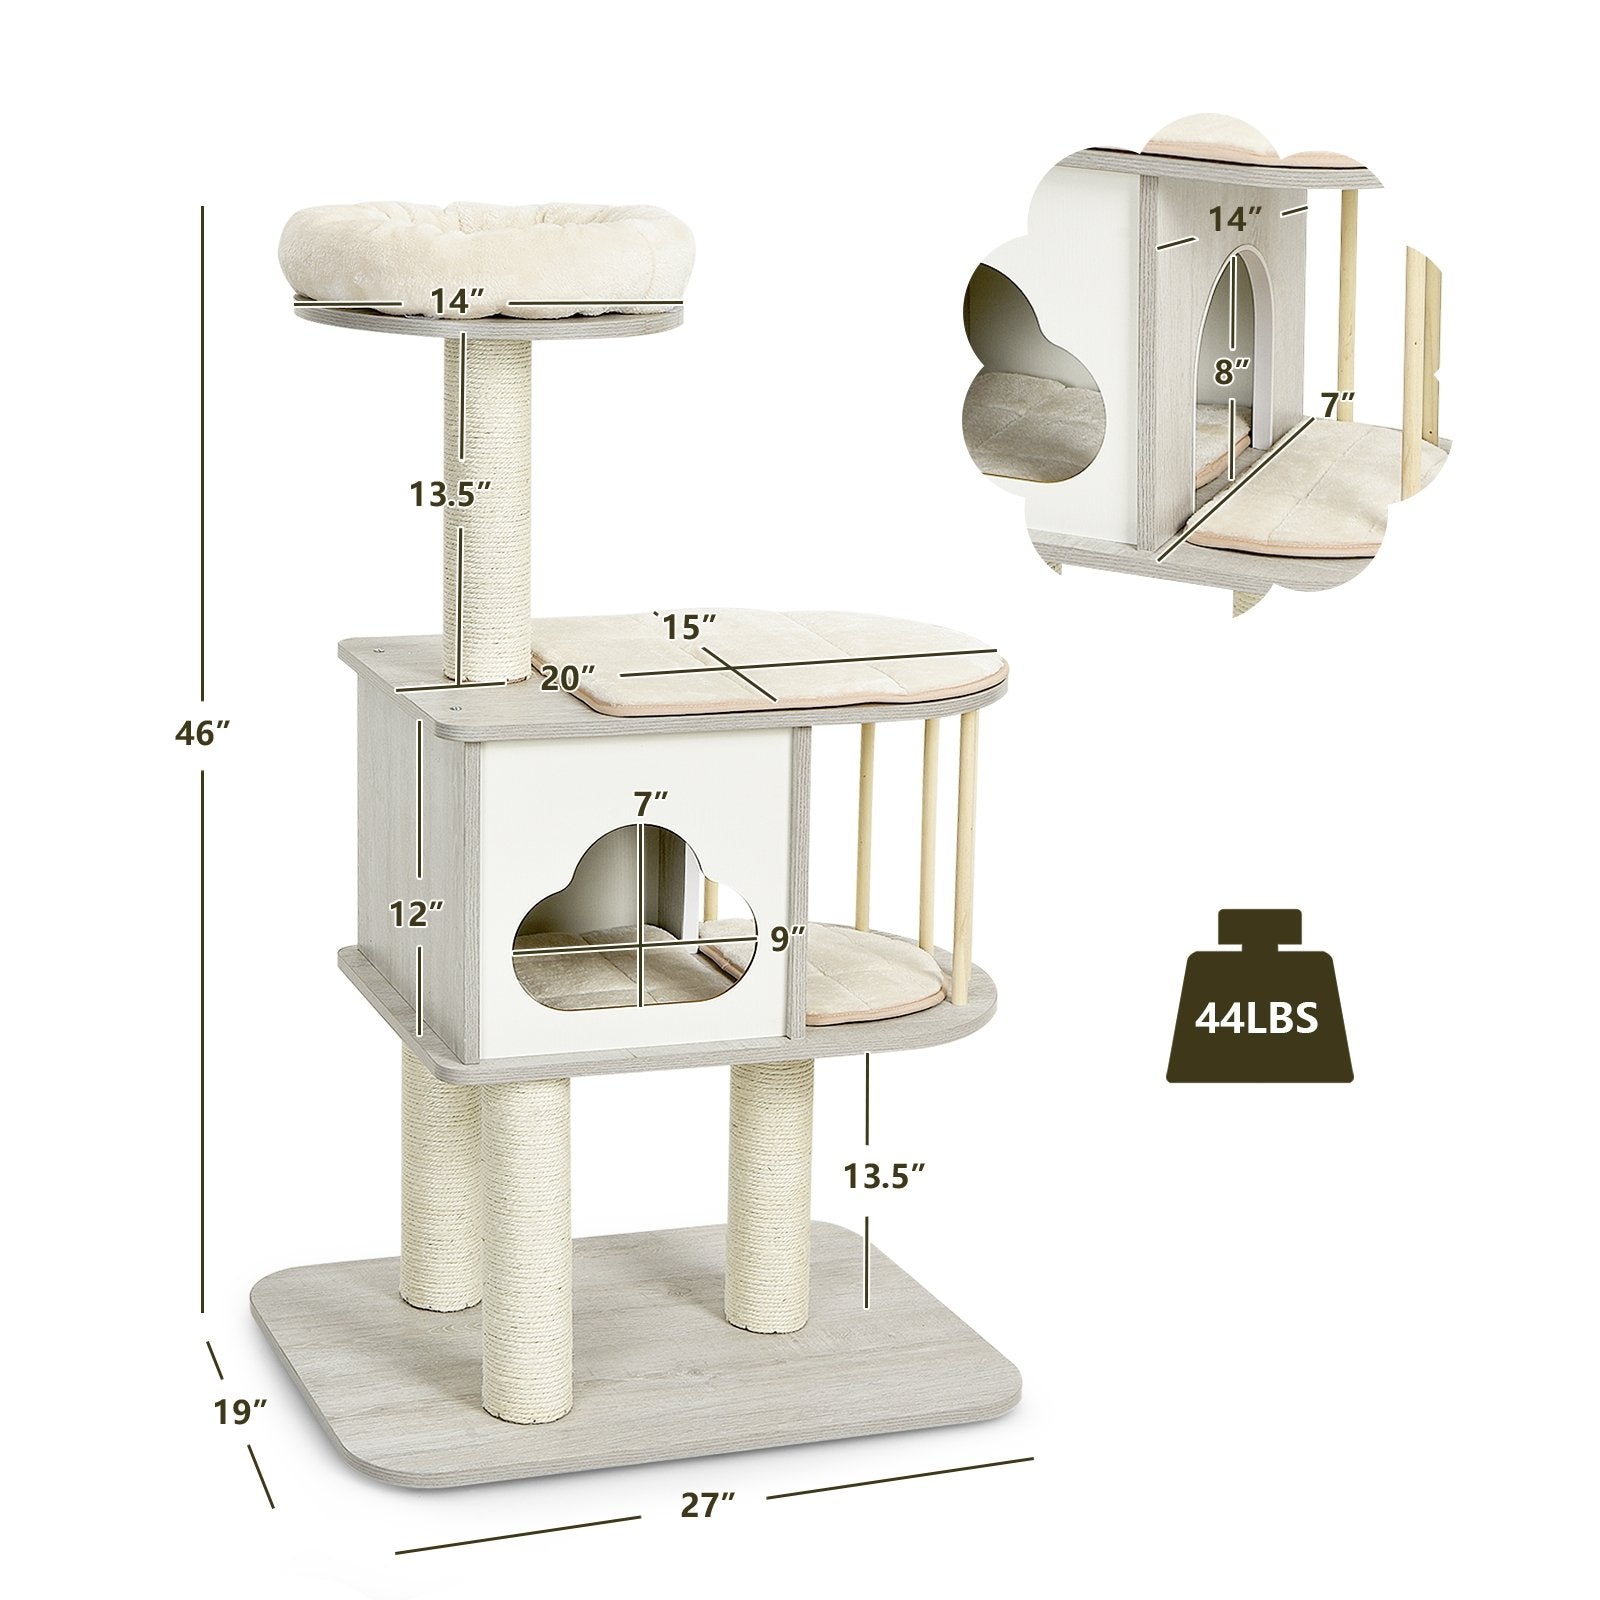 46 Inch Wooden Cat Activity Tree with Platform and Cushionsfor for Cats and Kittens, Gray - Gallery Canada